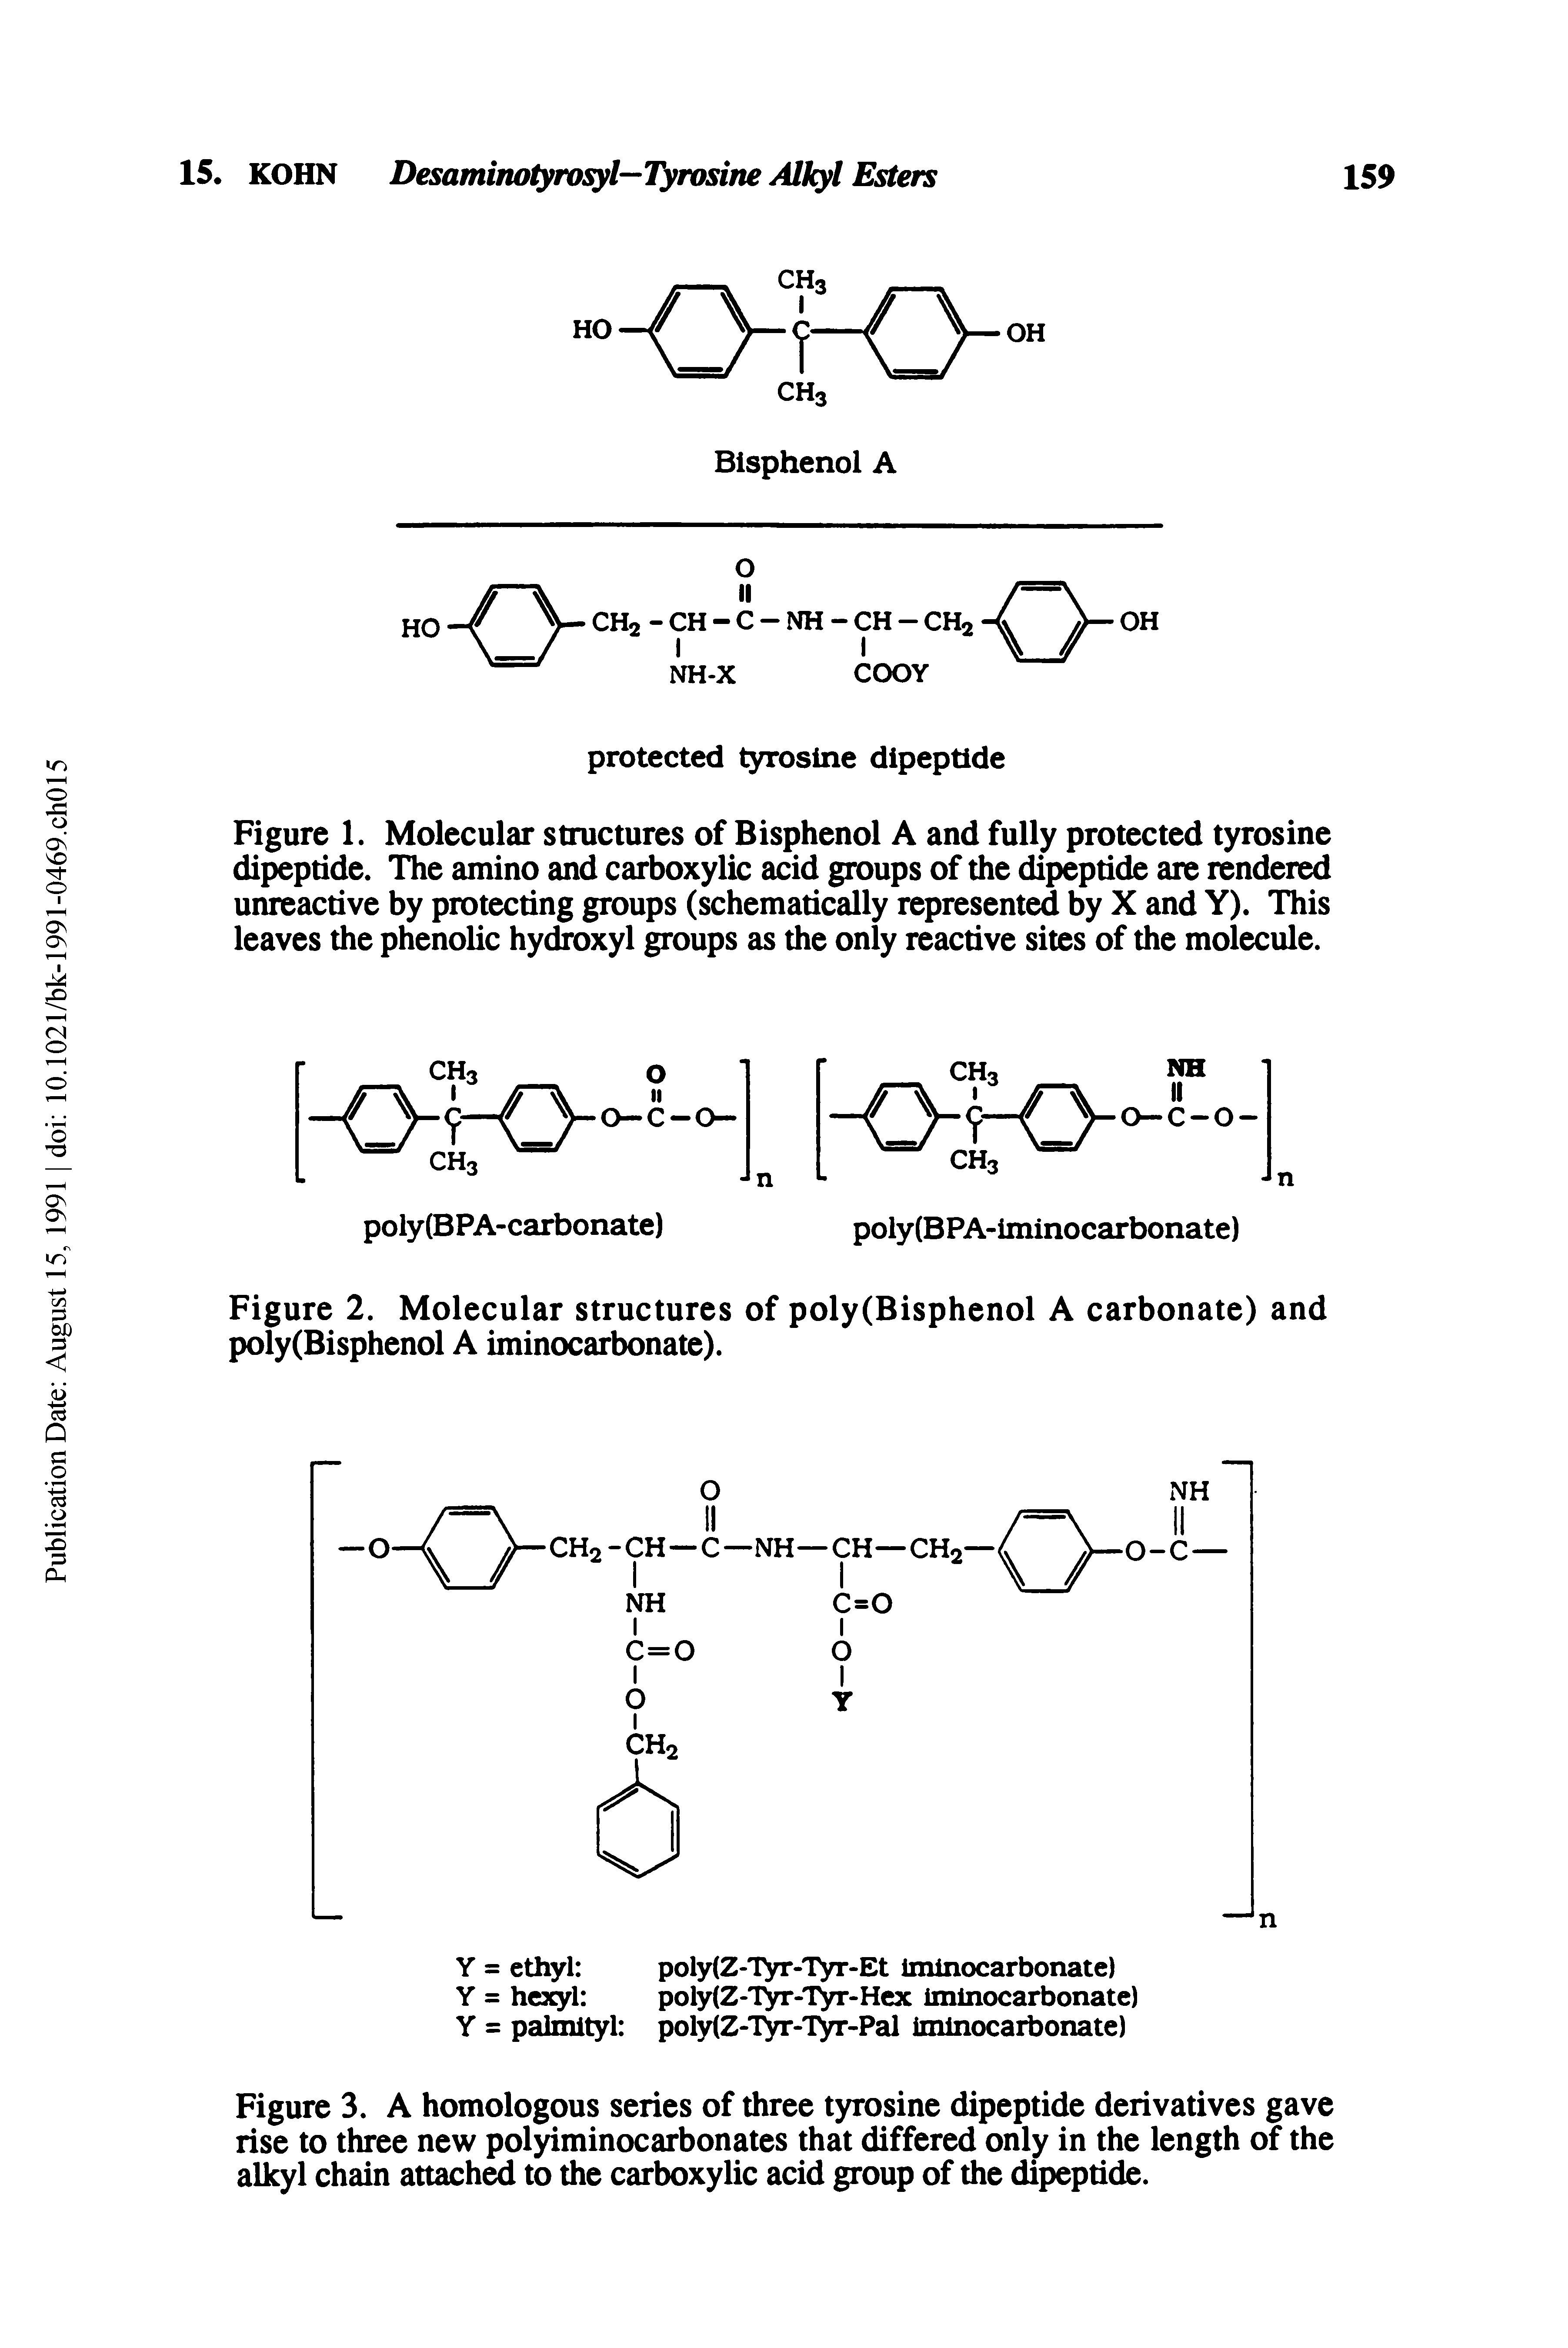 Figure 3. A homologous series of three tyrosine dipeptide derivatives gave rise to three new polyiminocarbonates that differed only in the length of the alkyl chain attached to the carboxylic acid group of the dipeptide.